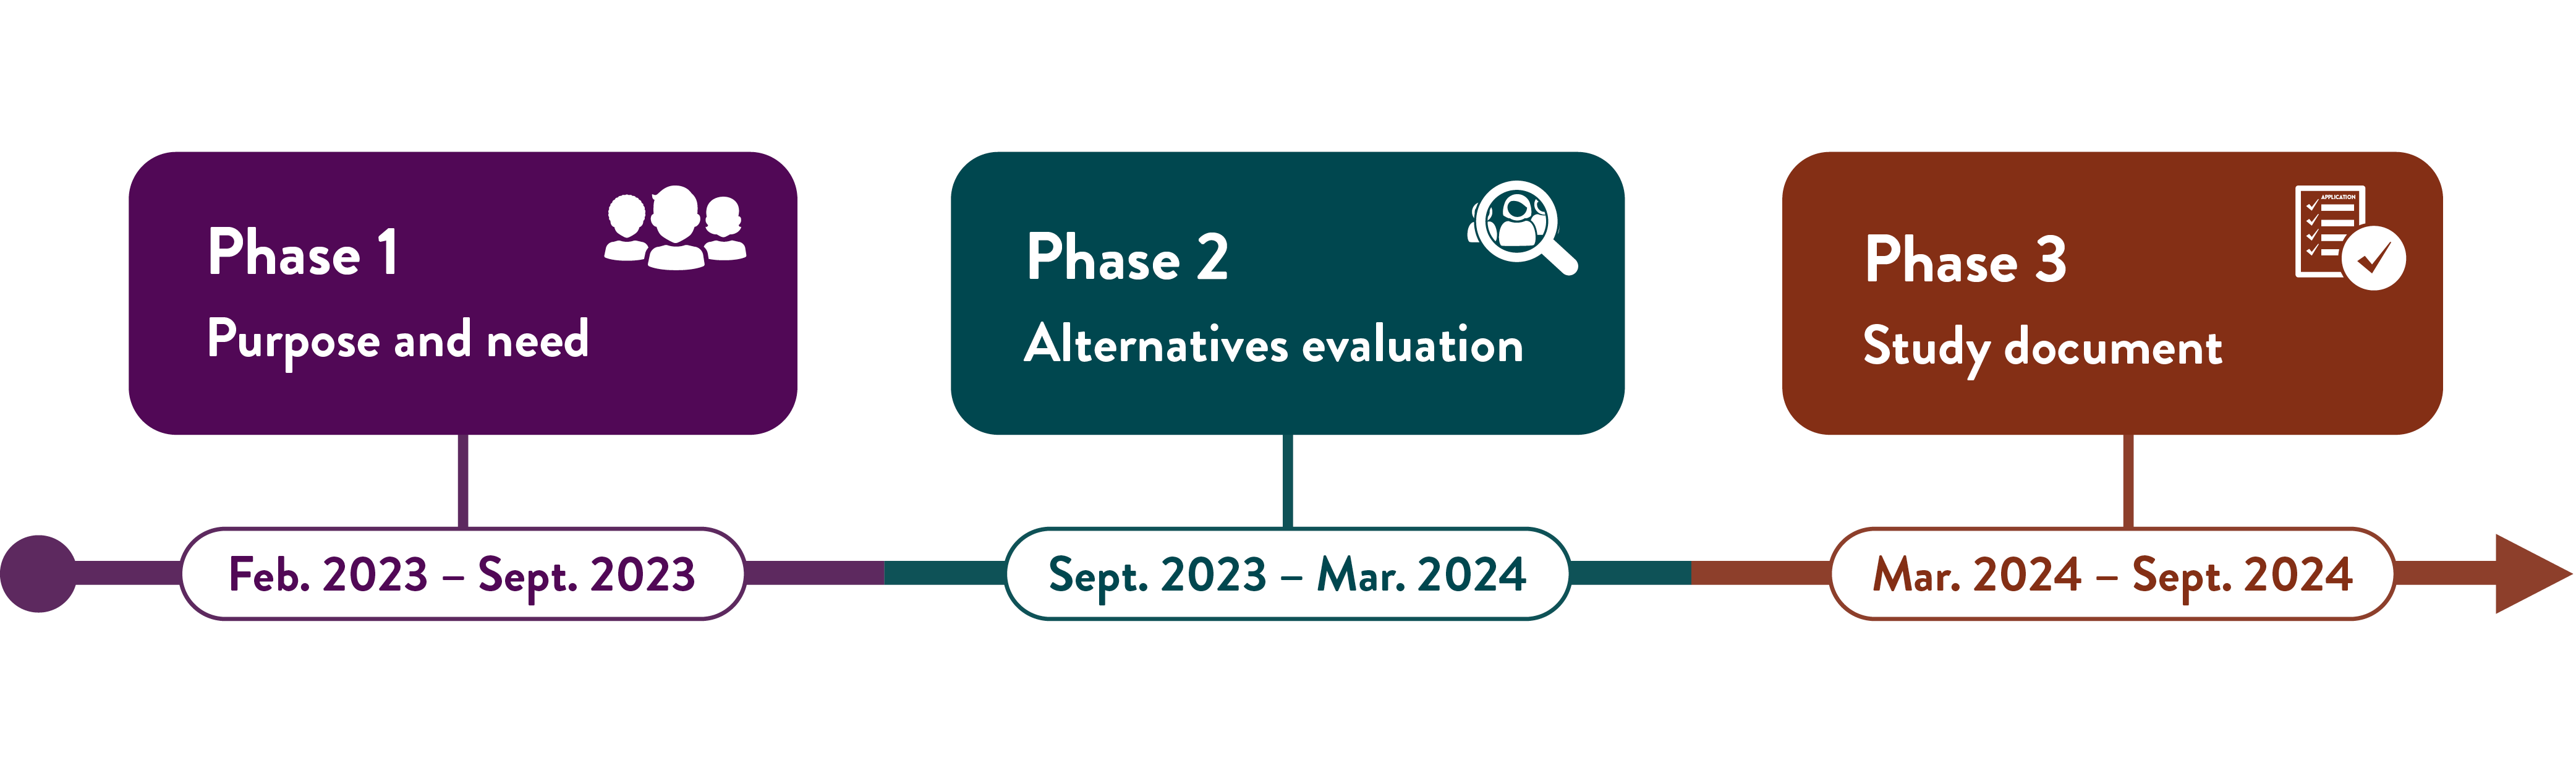 Timeline of the study phases showing Phase 1: Purpose and need (February 2023 through September 2023); Phase 2: Alternatives evaluation (September 2023 through February 2024); and Phase 3: Study document (February 2024 through April 2024).